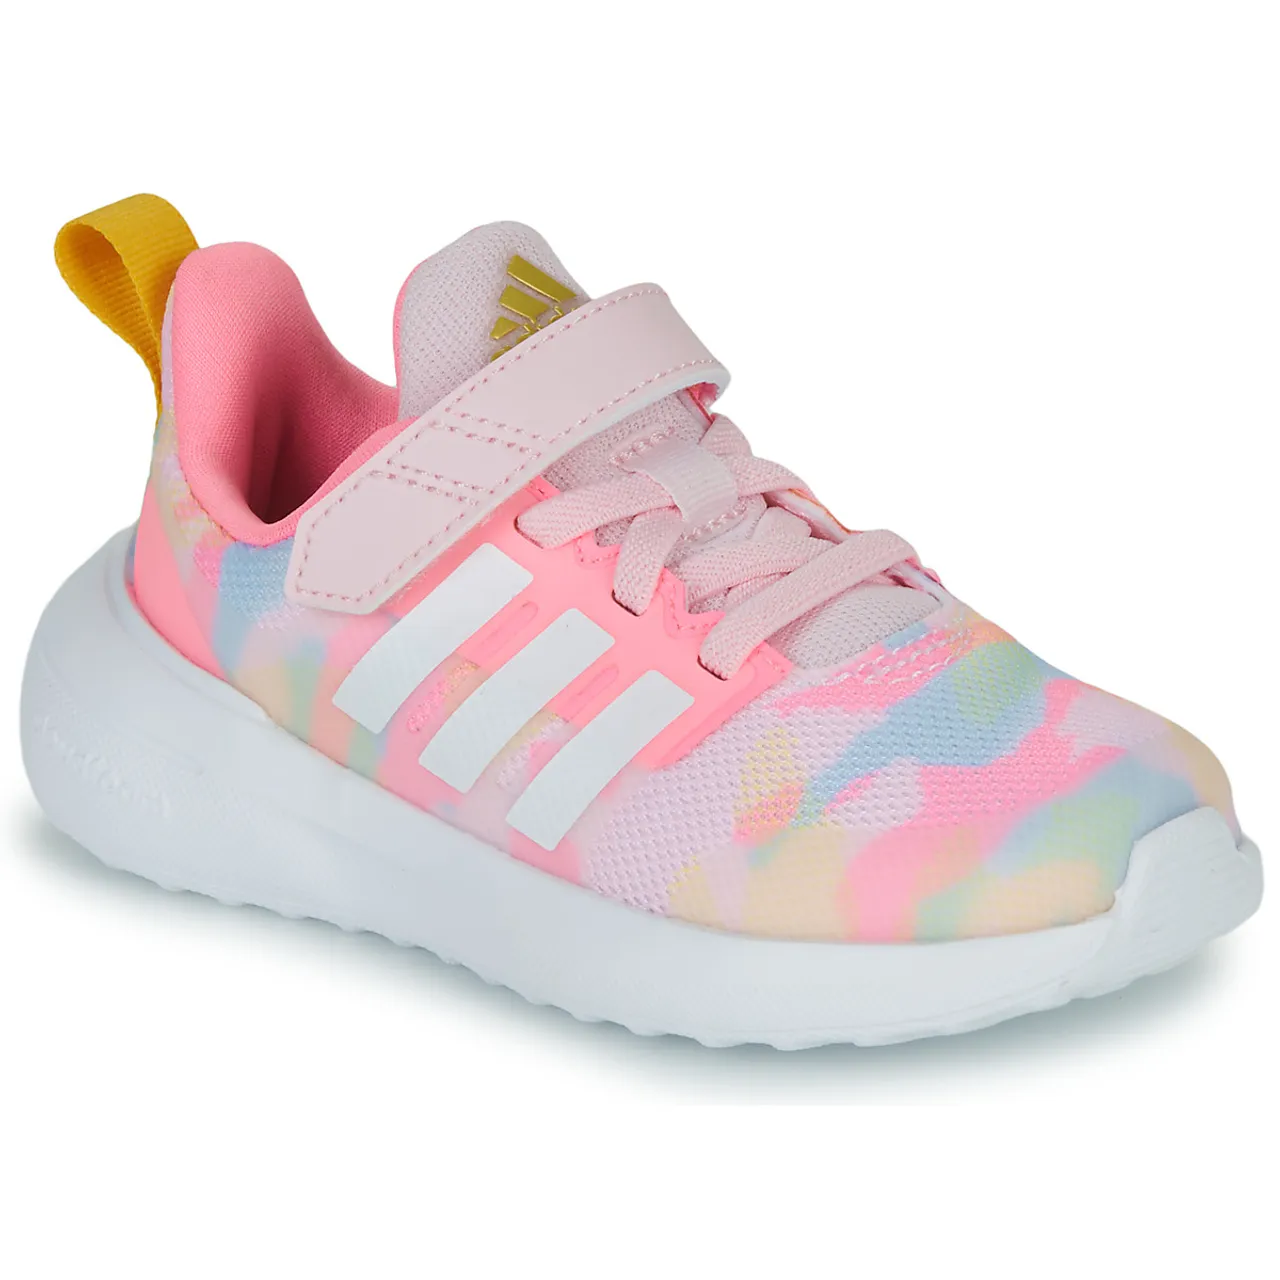 adidas  FortaRun 2.0 EL I  girls's Children's Shoes (Trainers) in Pink